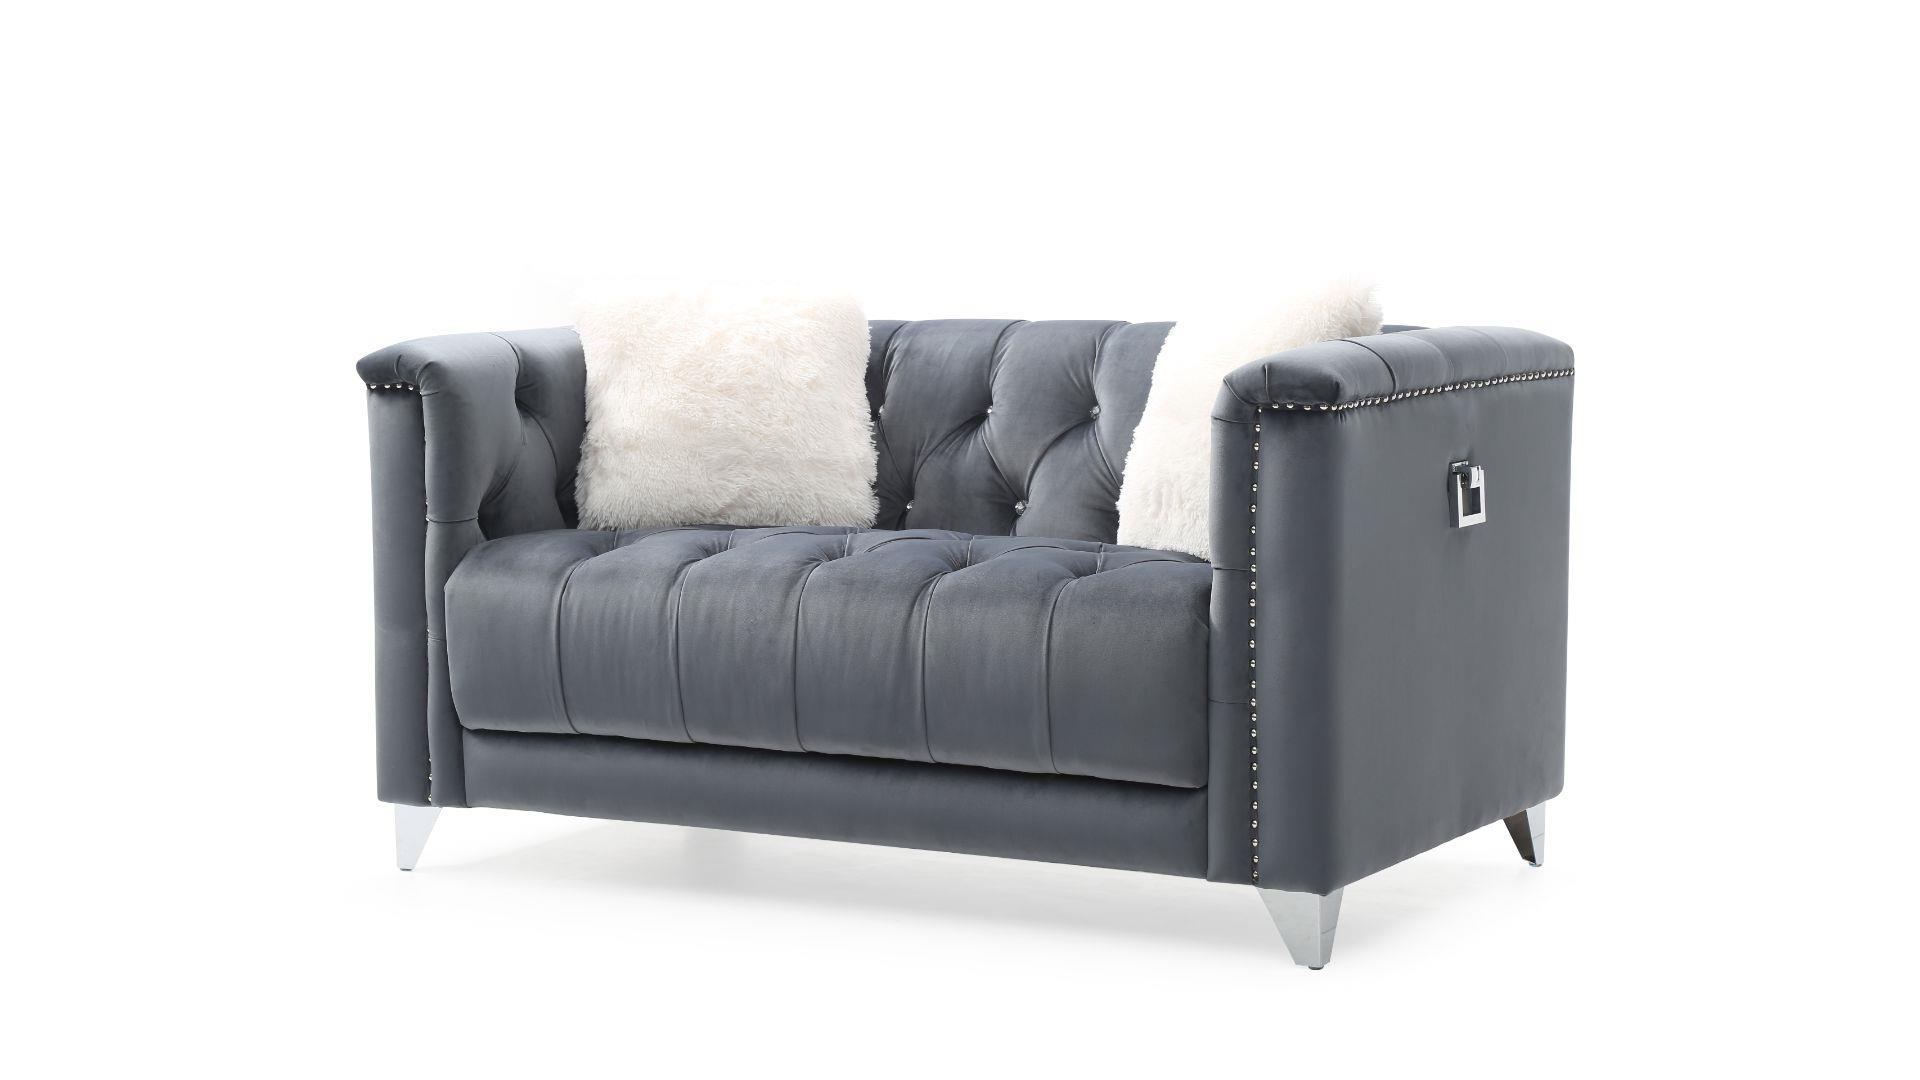 Contemporary, Modern Loveseat RUSSELL 733569217731 in Gray Fabric